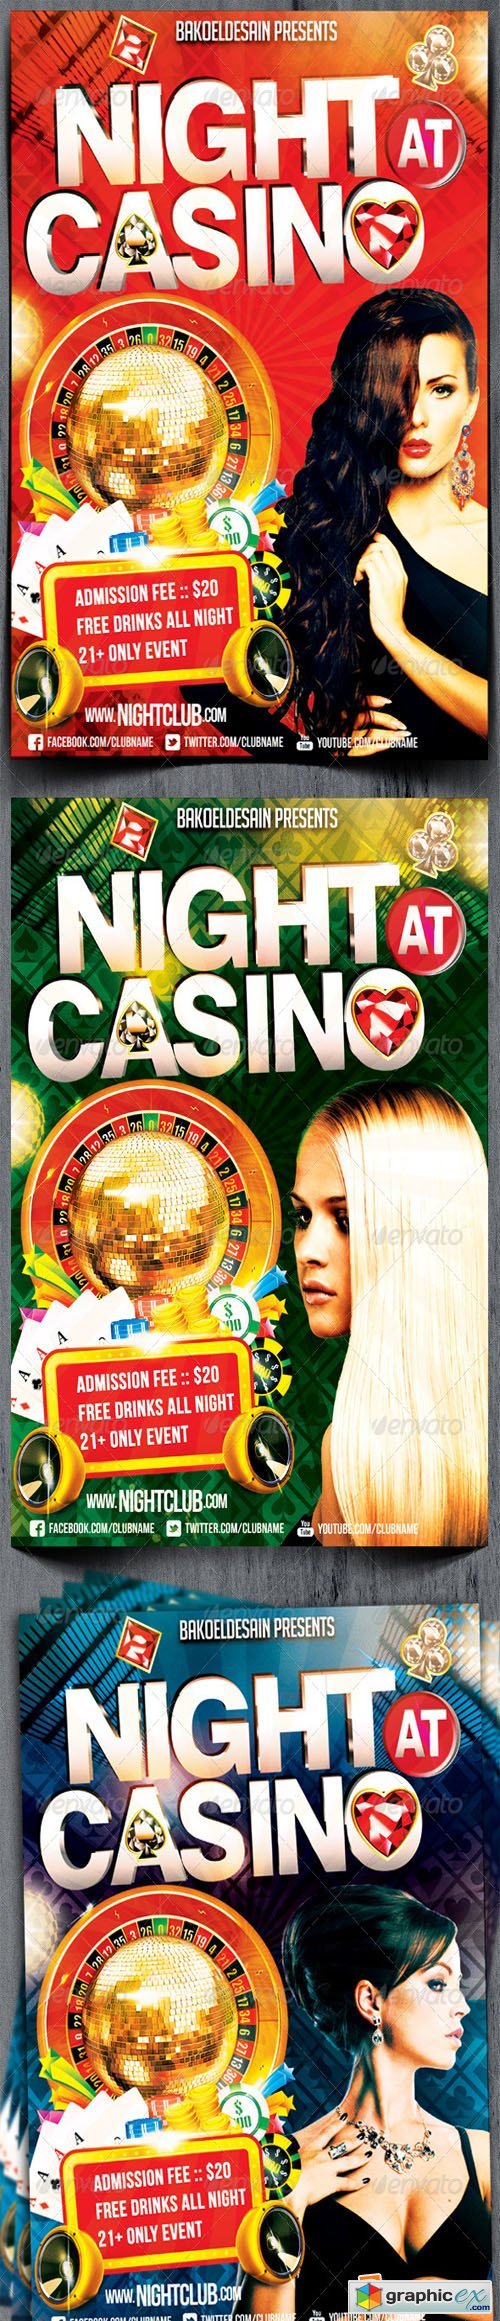 Night at Casino Party Flyers